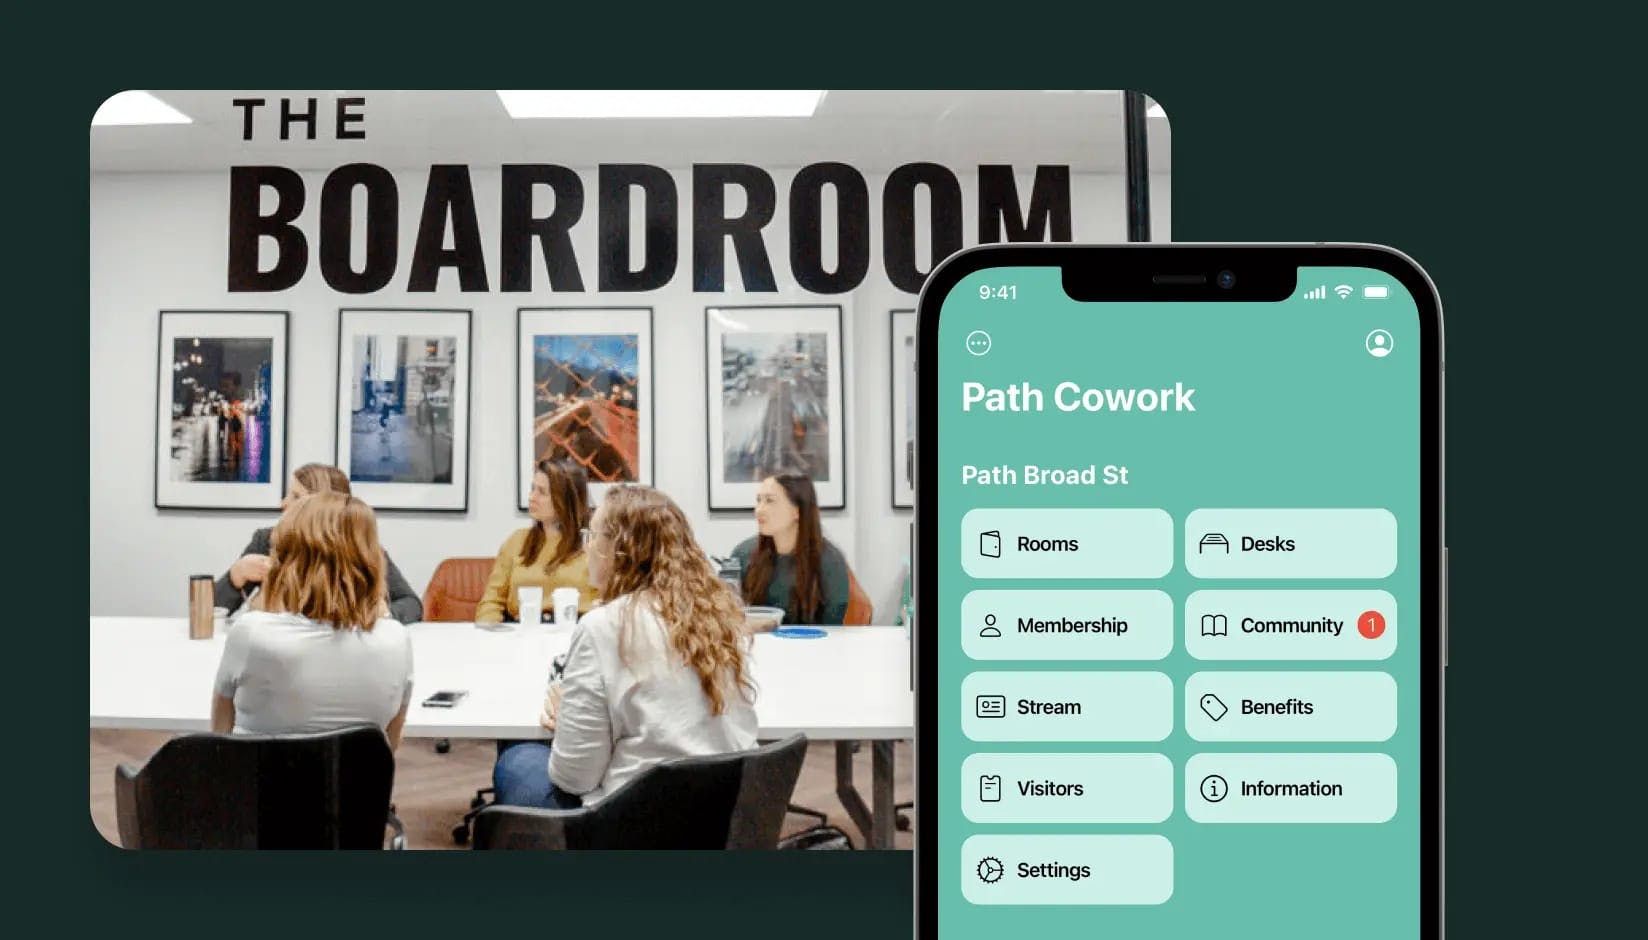 Spacebring coworking space software: app interface, desk and room booking system